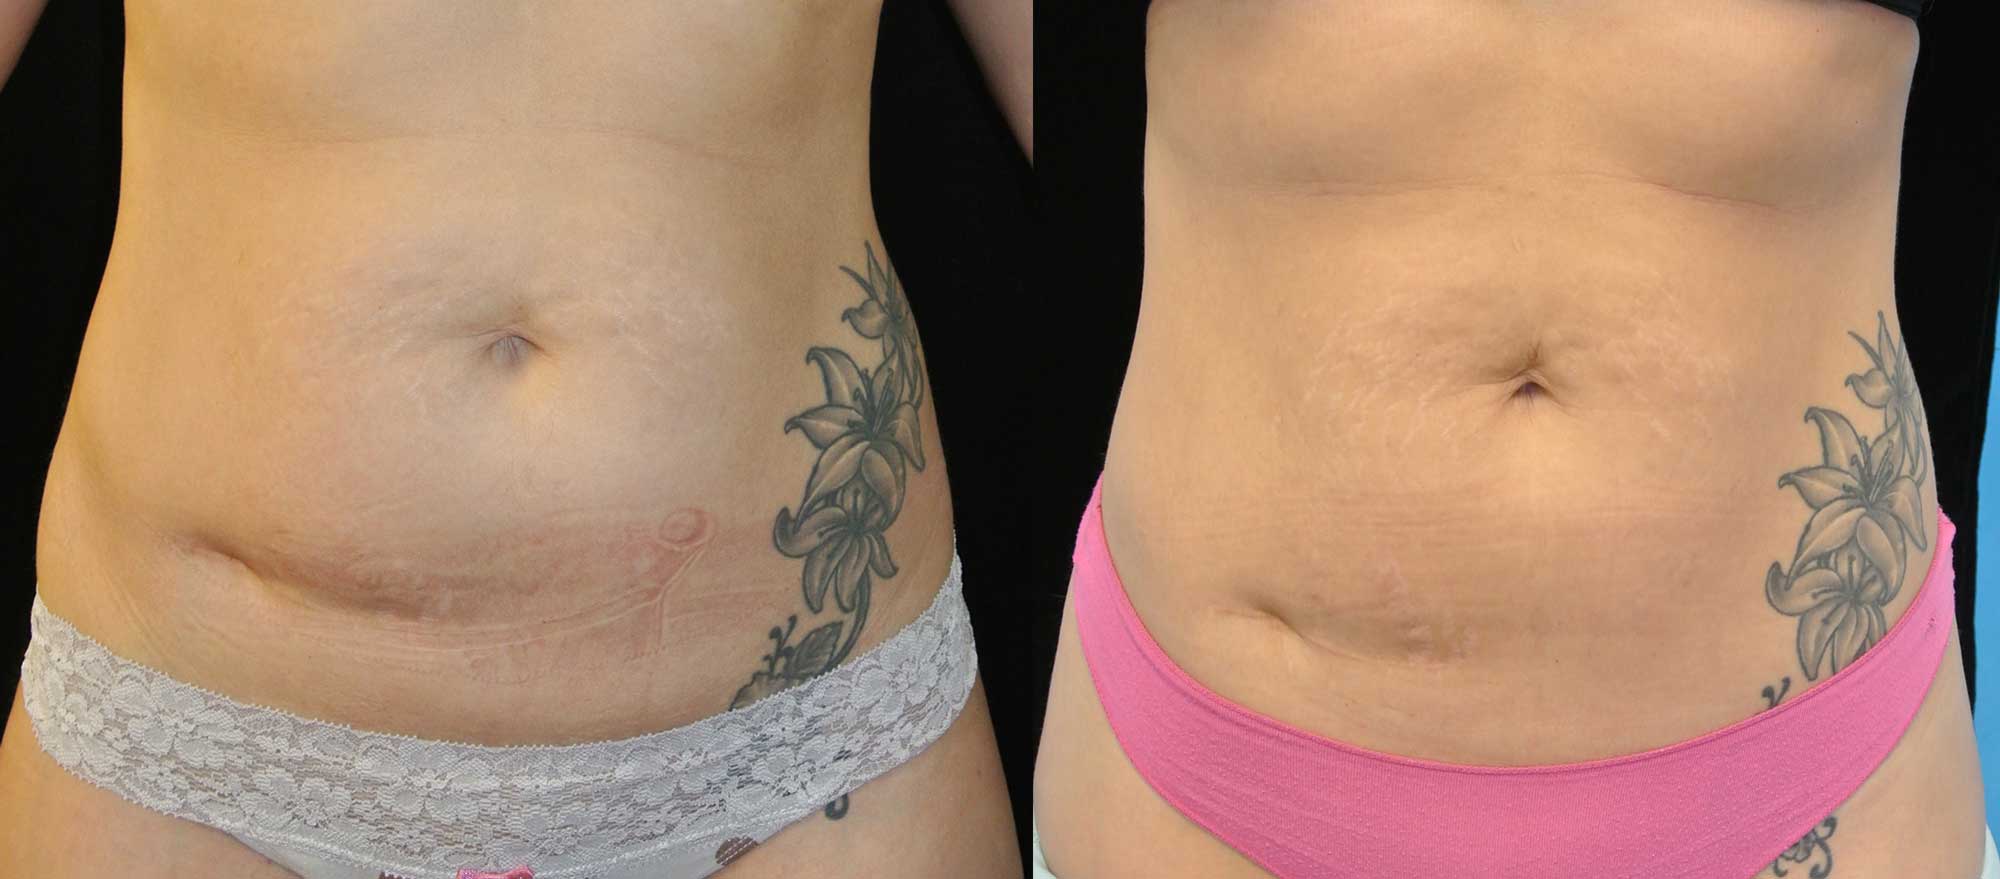 before and after close up photo of a female abdomen after a non surgical laser fat melting